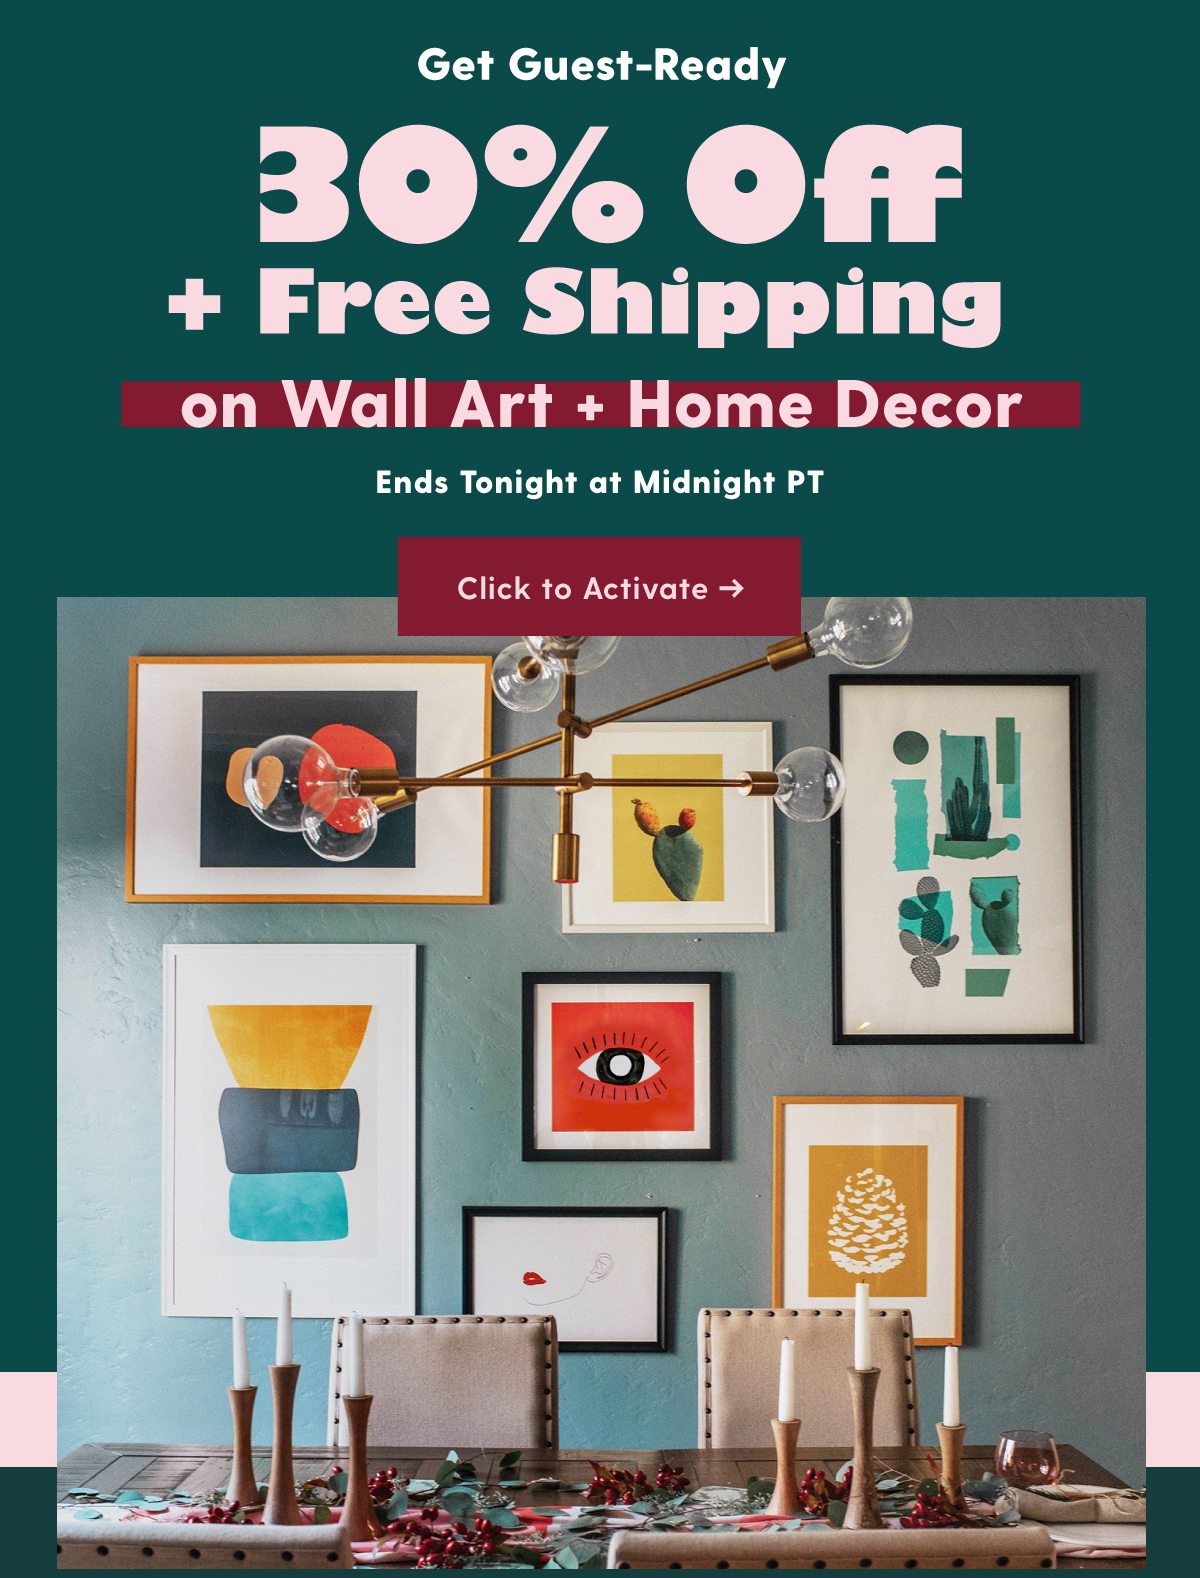 30% OFF + FREE SHIPPING ON WALL ART AND HOME DECOR ends tonight @ midnight Click to Activate